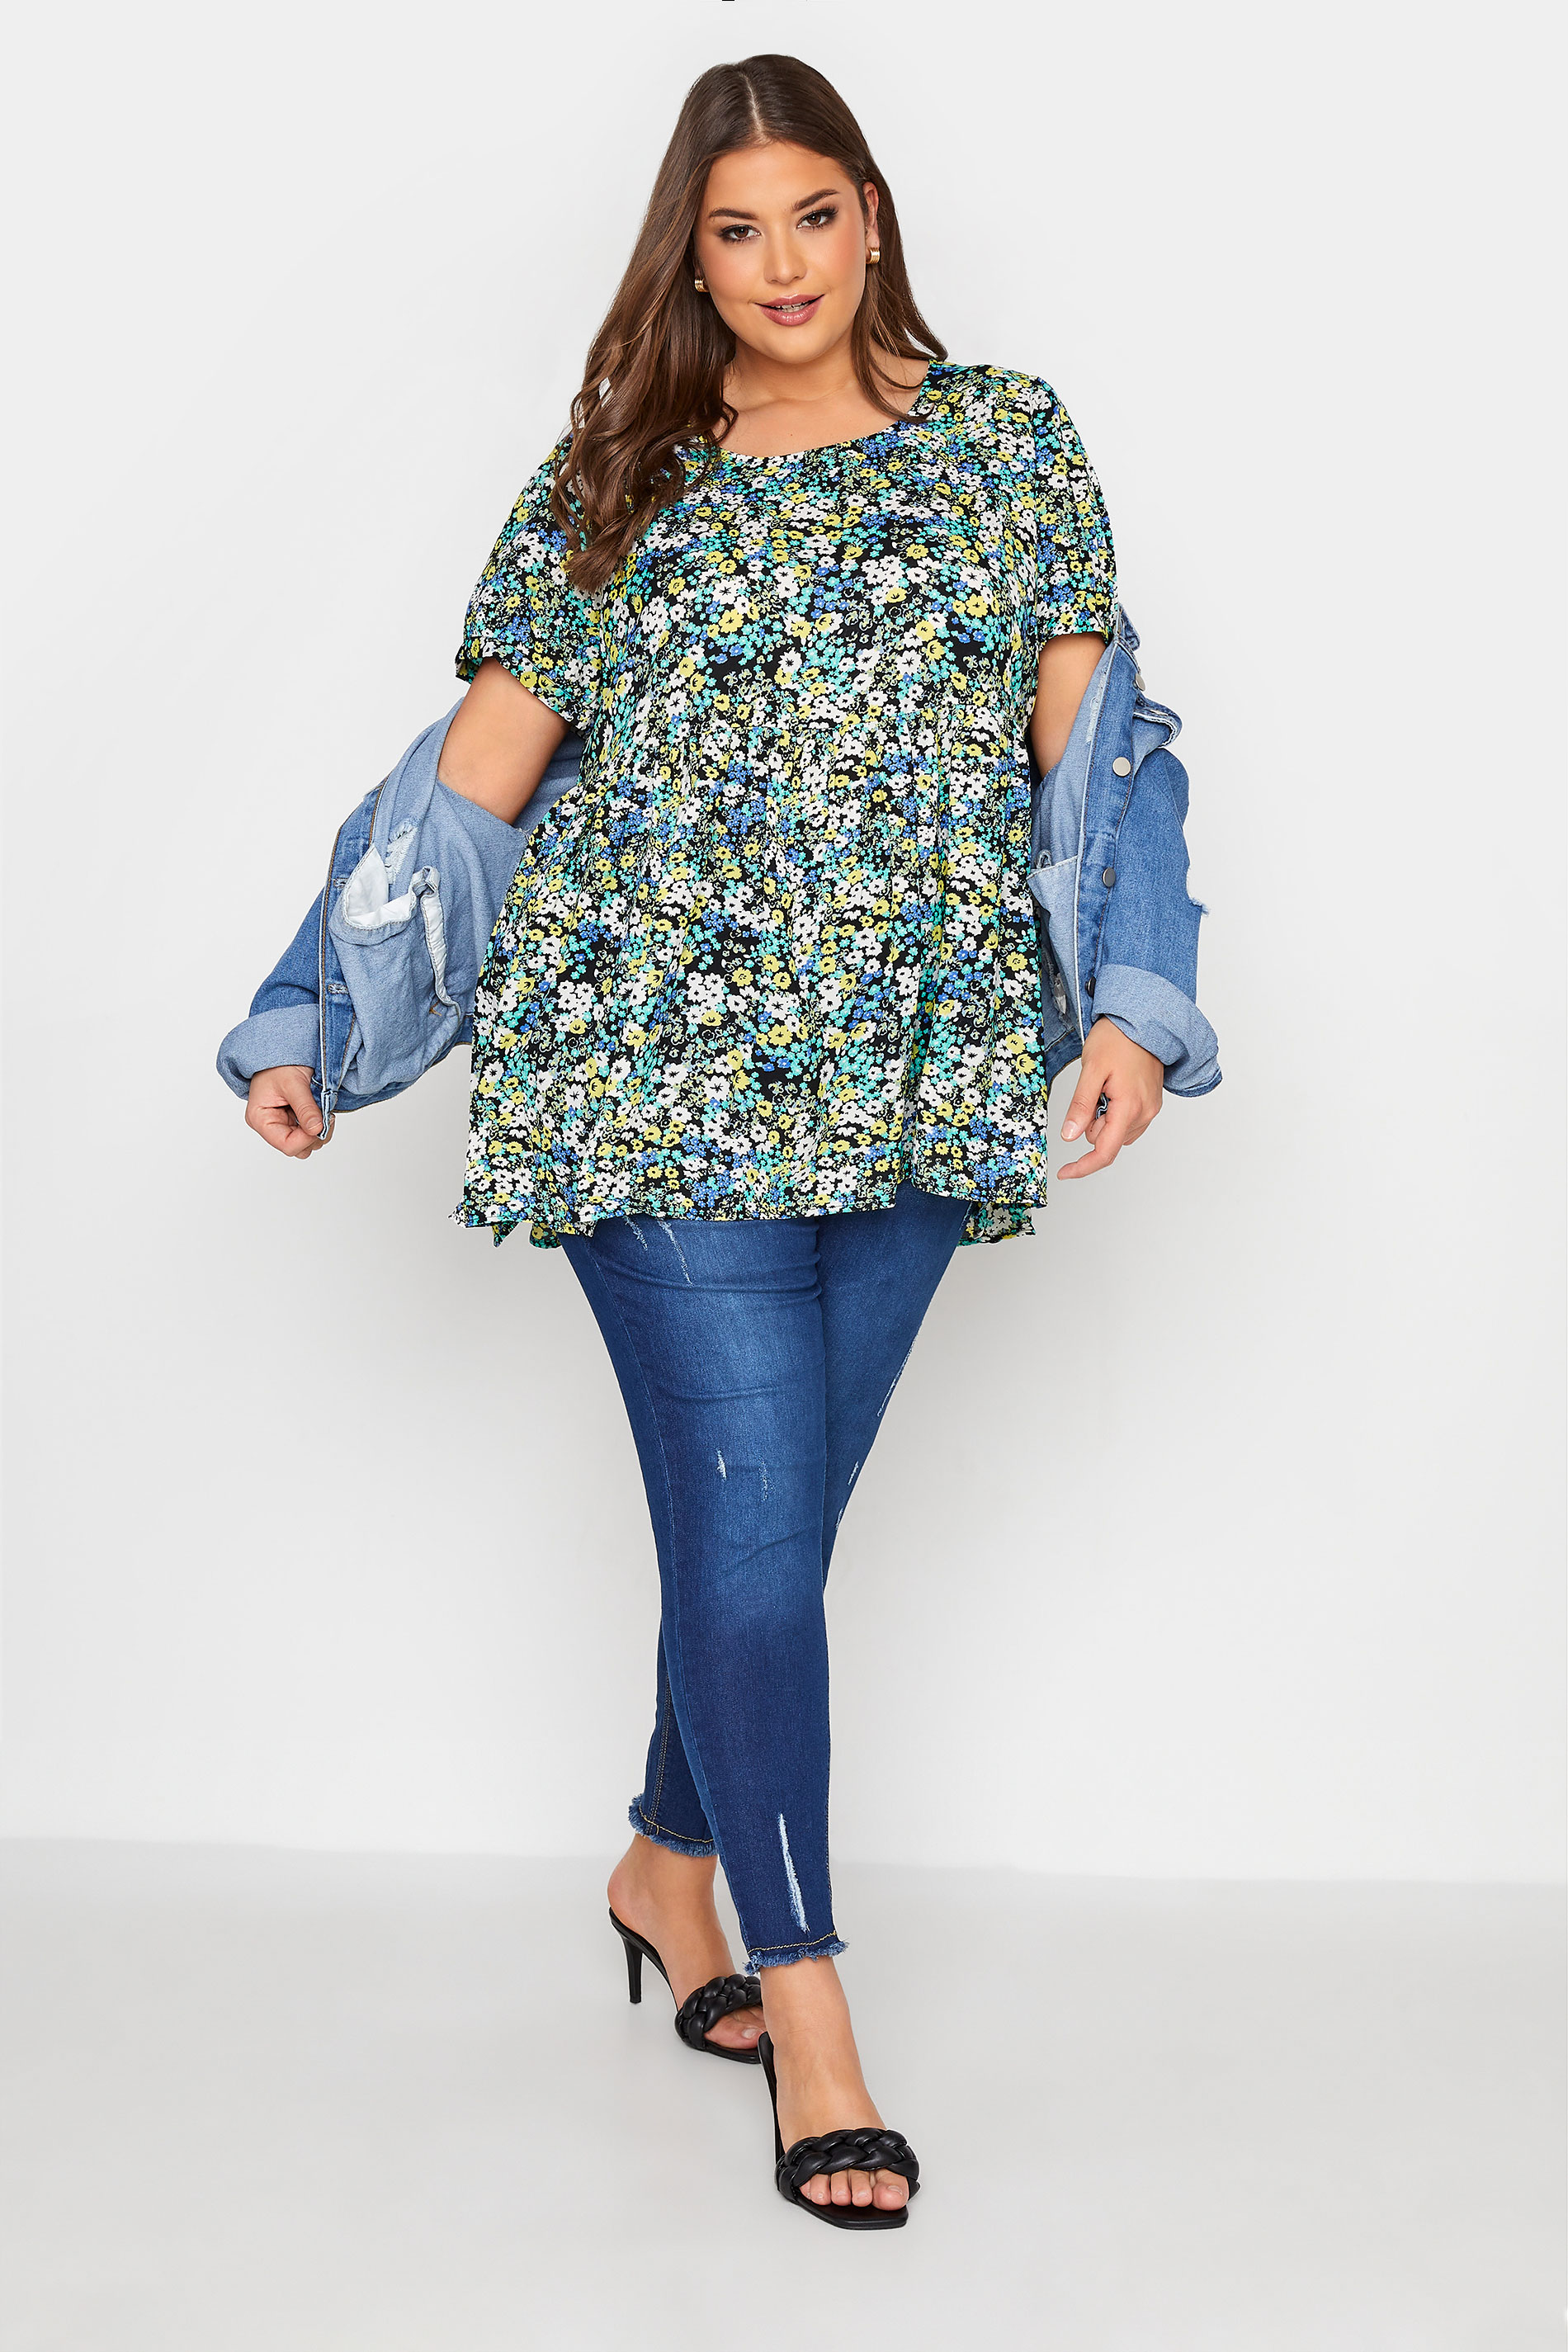 Grande taille  Tops Grande taille  Tops Jersey | Top Vert Imprimé Floral Manches Bouffantes - YD02149